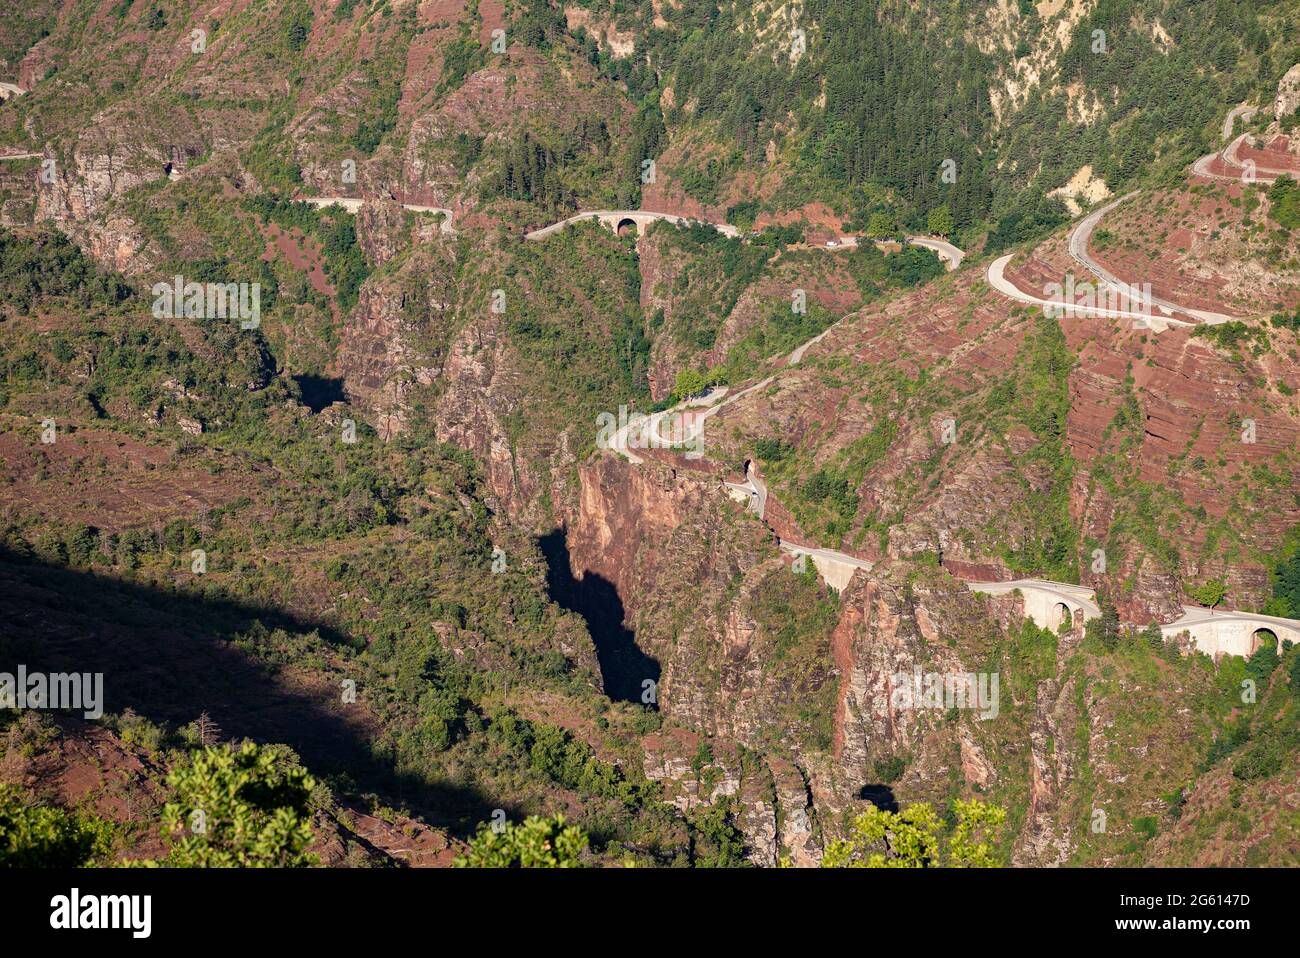 France, Alpes maritimes, Mercantour mountain range, Var high valley, Guillaumes, Daluis Gorges Nature Reserve Stock Photo